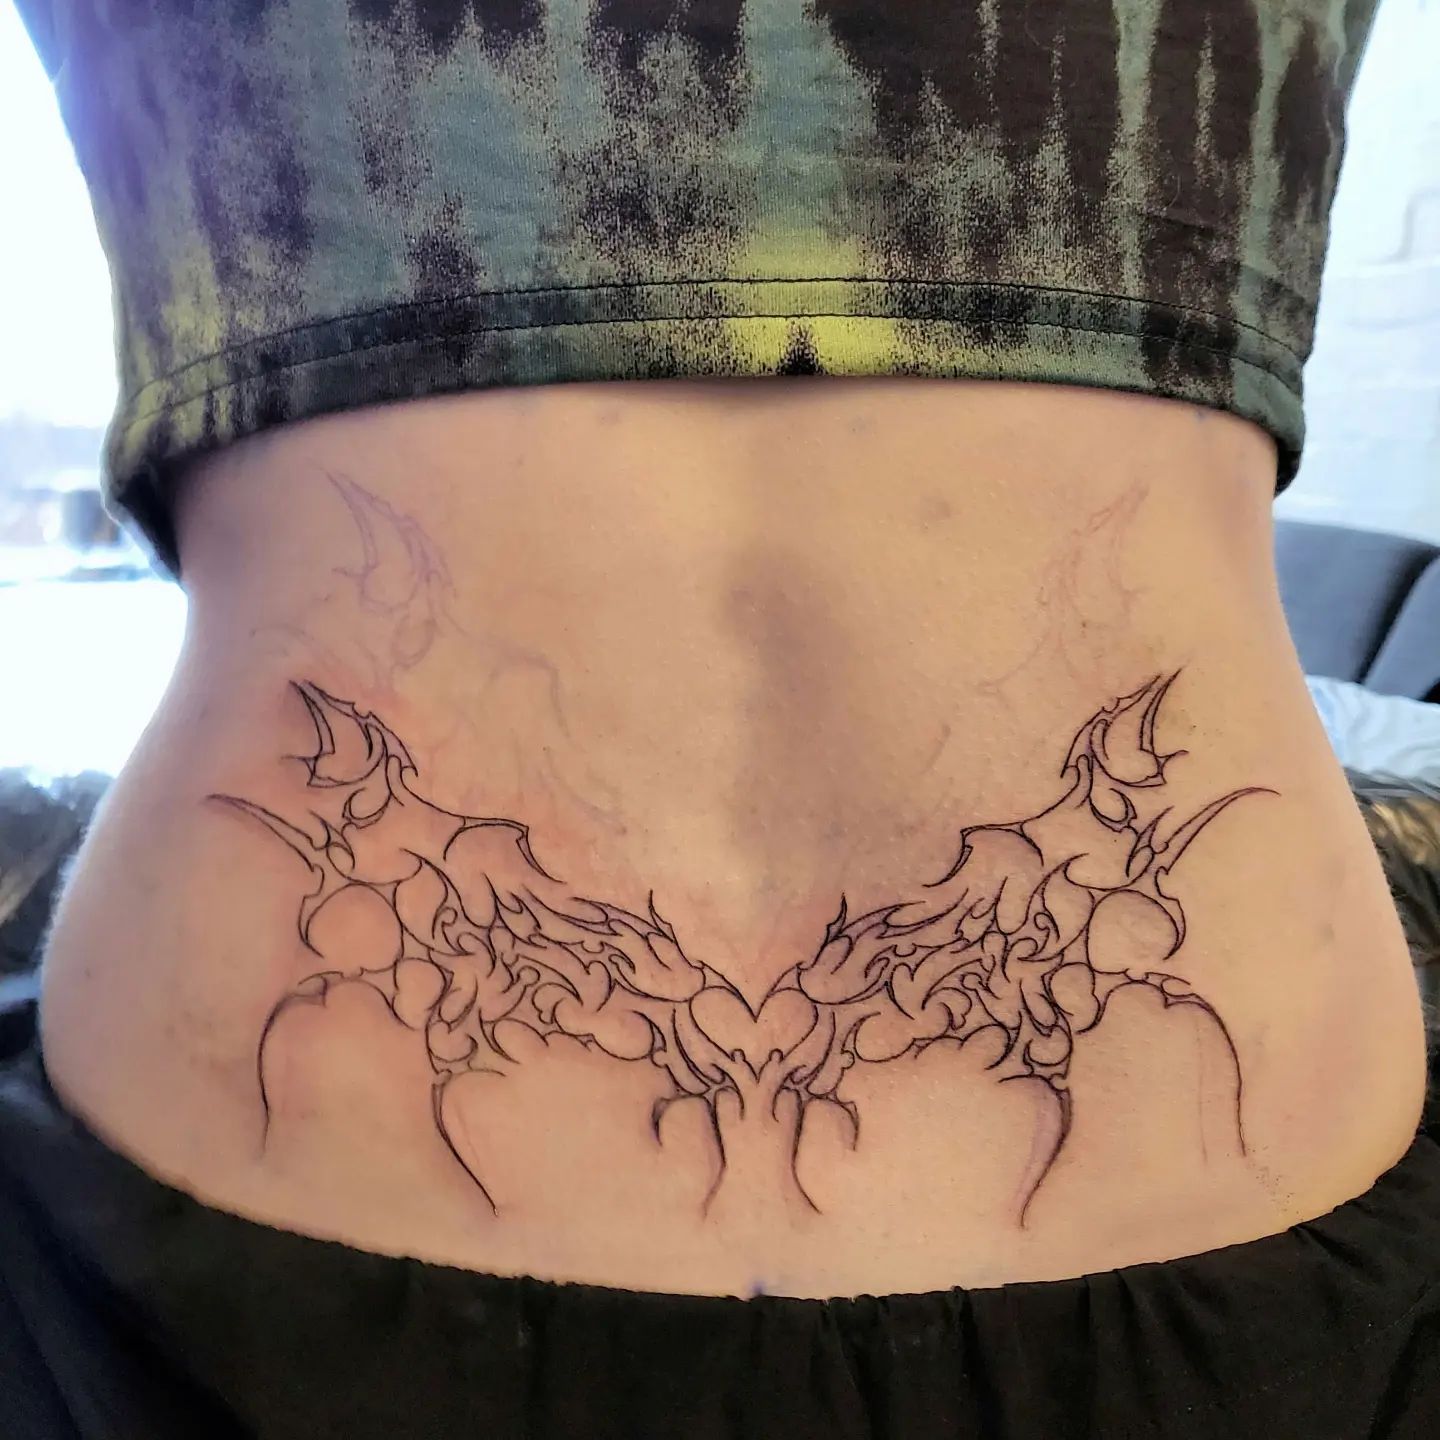 Younger women may prefer this tattoo a tad bit more than other women. This design describes your wild and unpredictable side. Sounds like you?